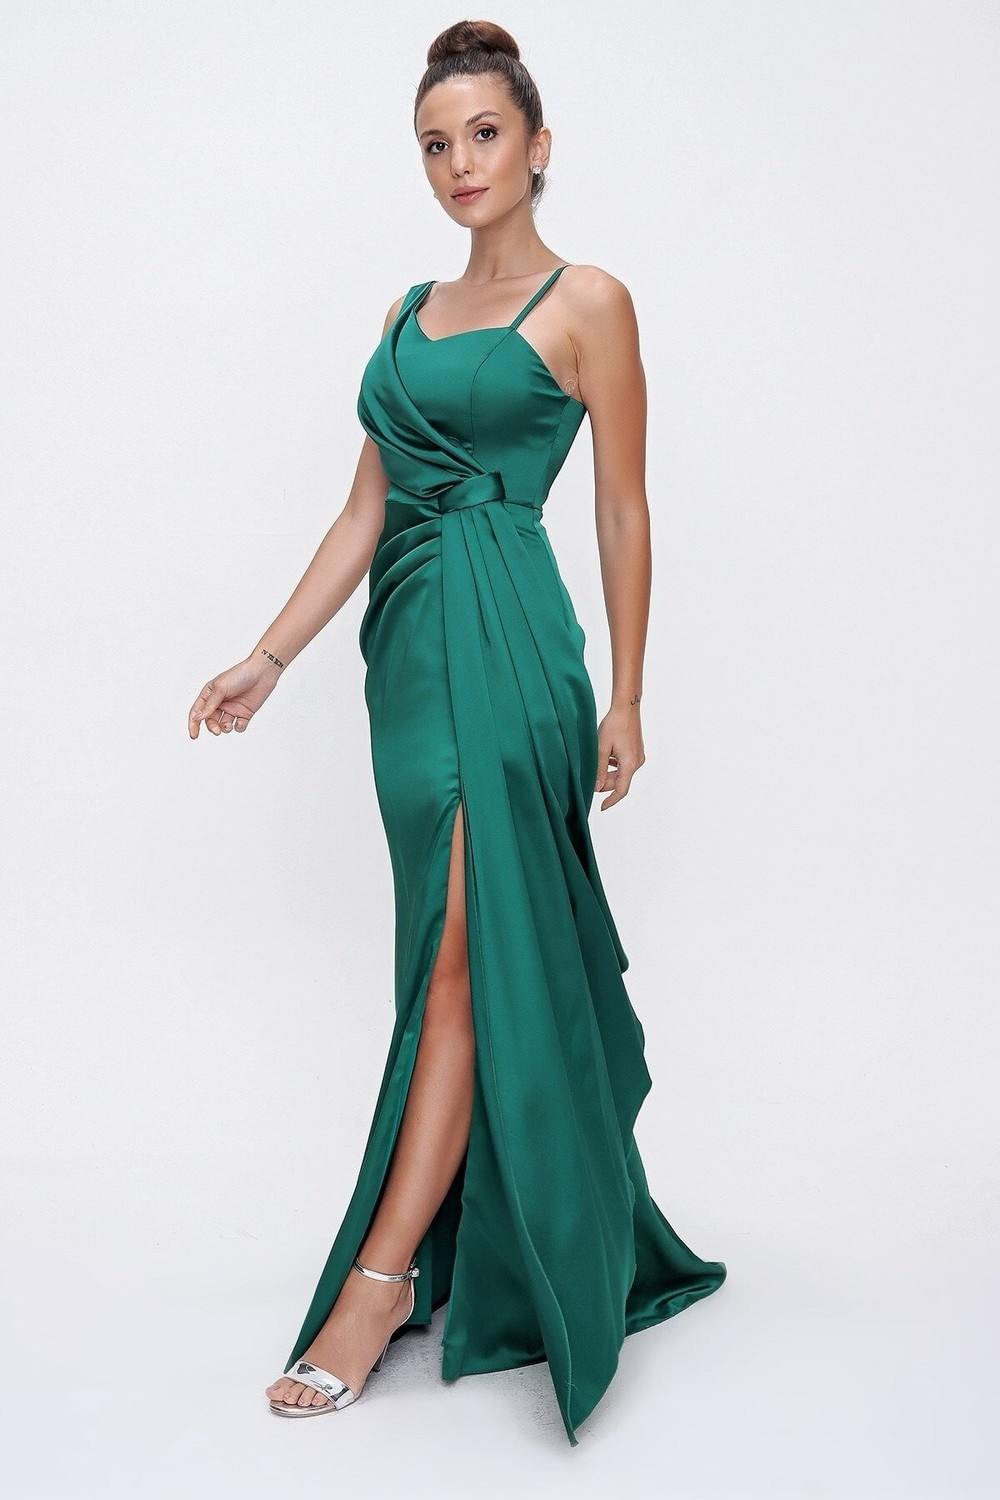 By Saygı Green Evening Dress with Lining and Satin.